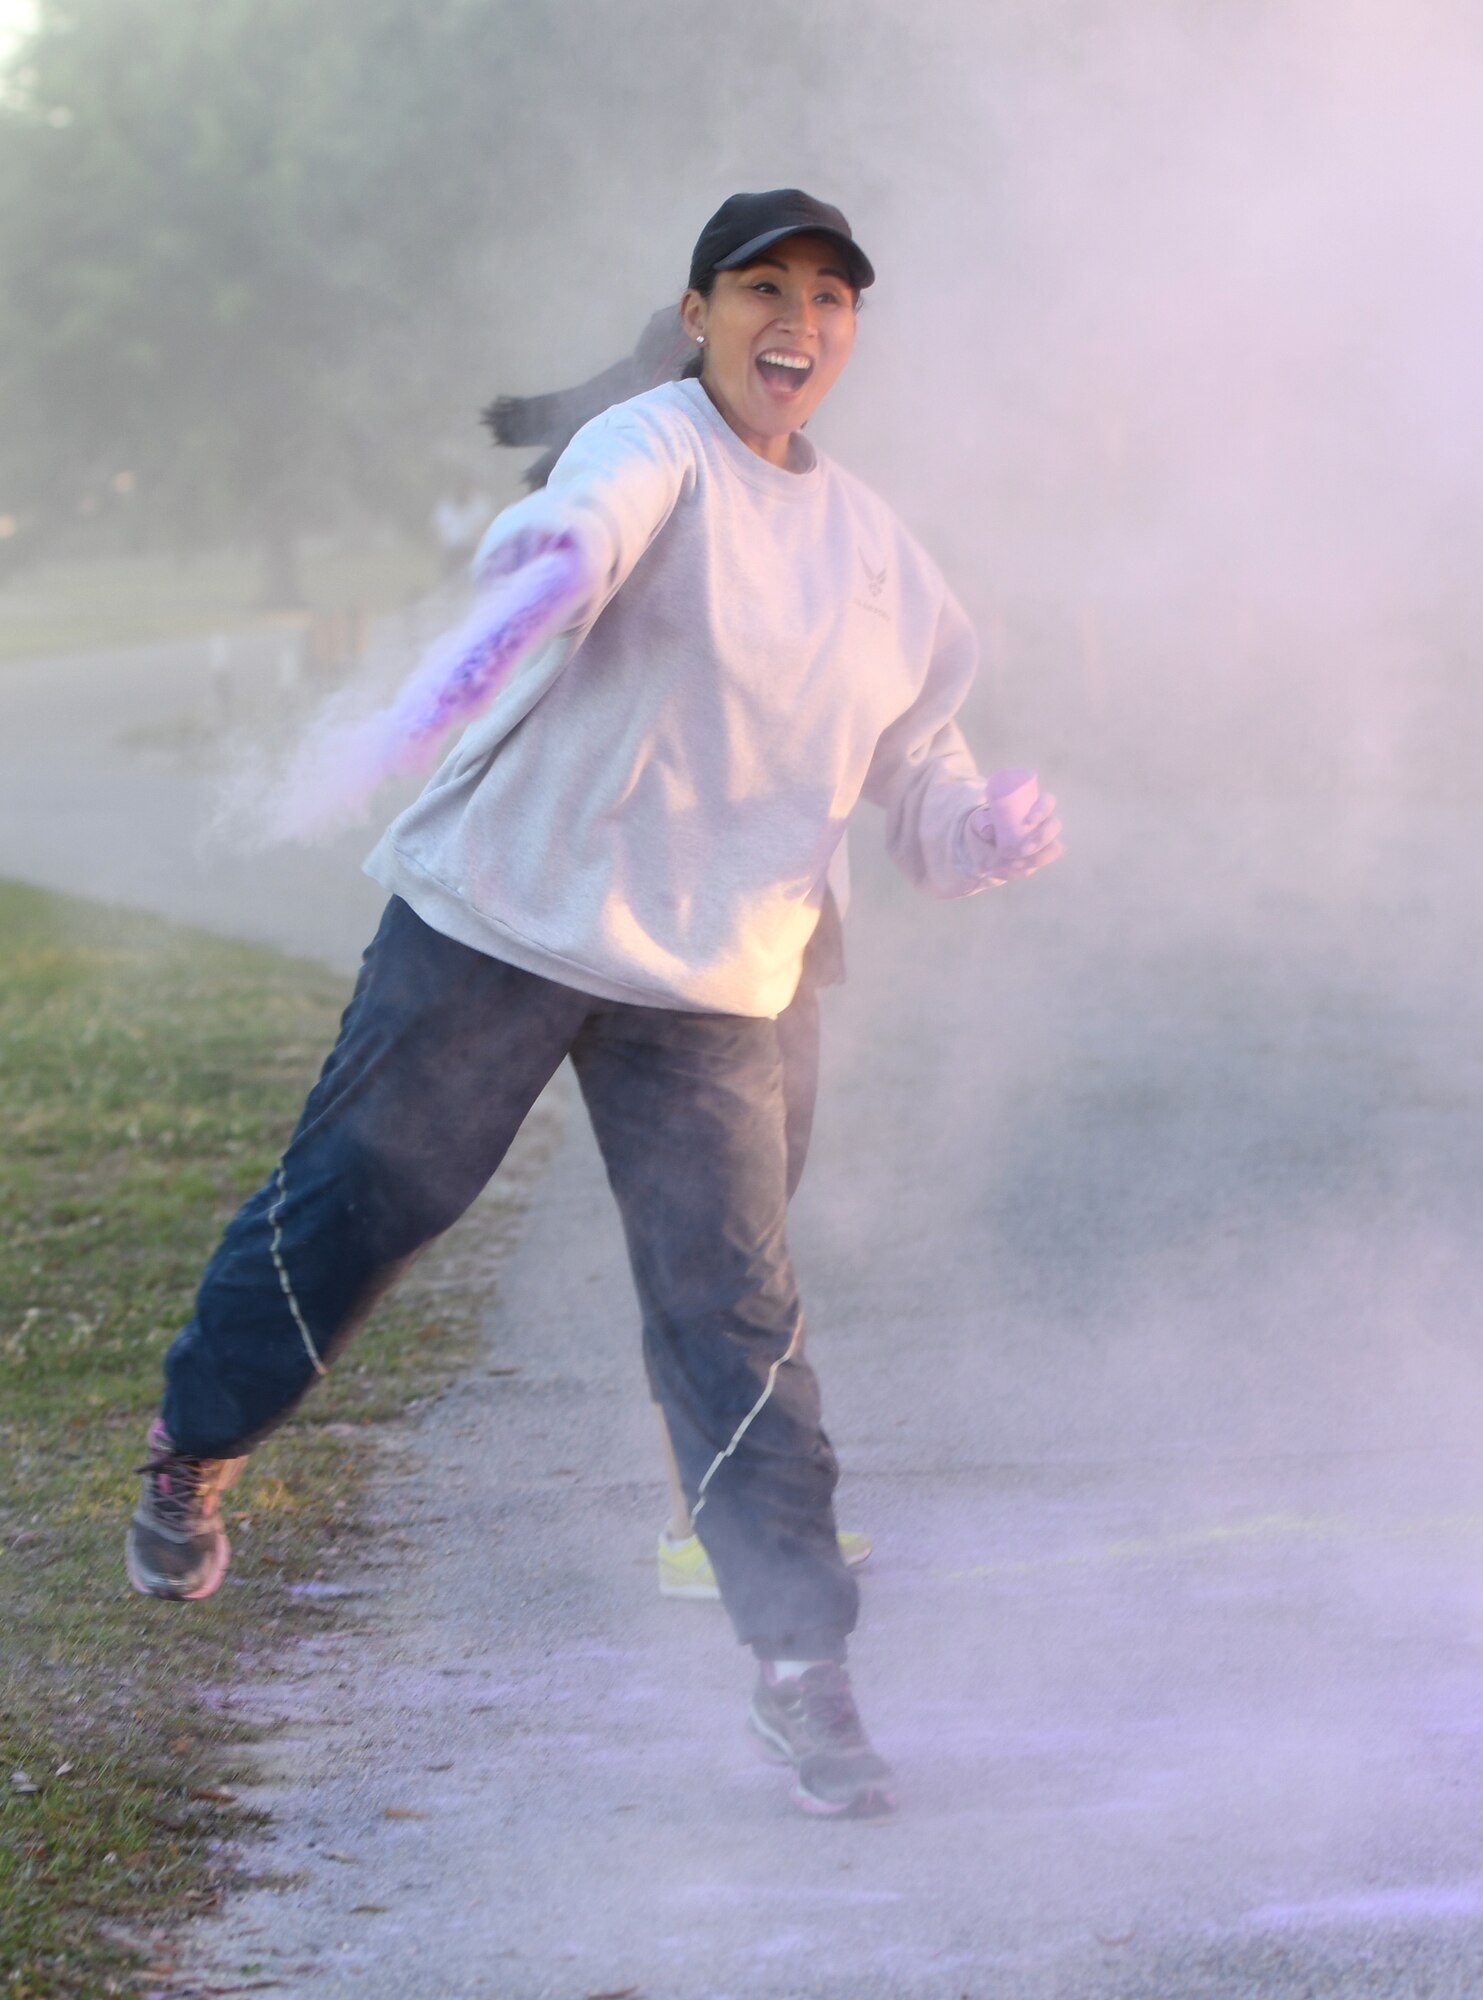 U.S. Air Force Chief Master Sgt. MaryAnn Navarro-Davis, 81st Mission Support Group superintendent, tosses purple powder on runners during the Air Force Assistance Fund Color Run at Keesler Air Force Base, Mississippi, April 20, 2018. The AFAF raises funds for charitable affiliates that provide support to Air Force families in need. (U.S. Air Force photo by Kemberly Groue)